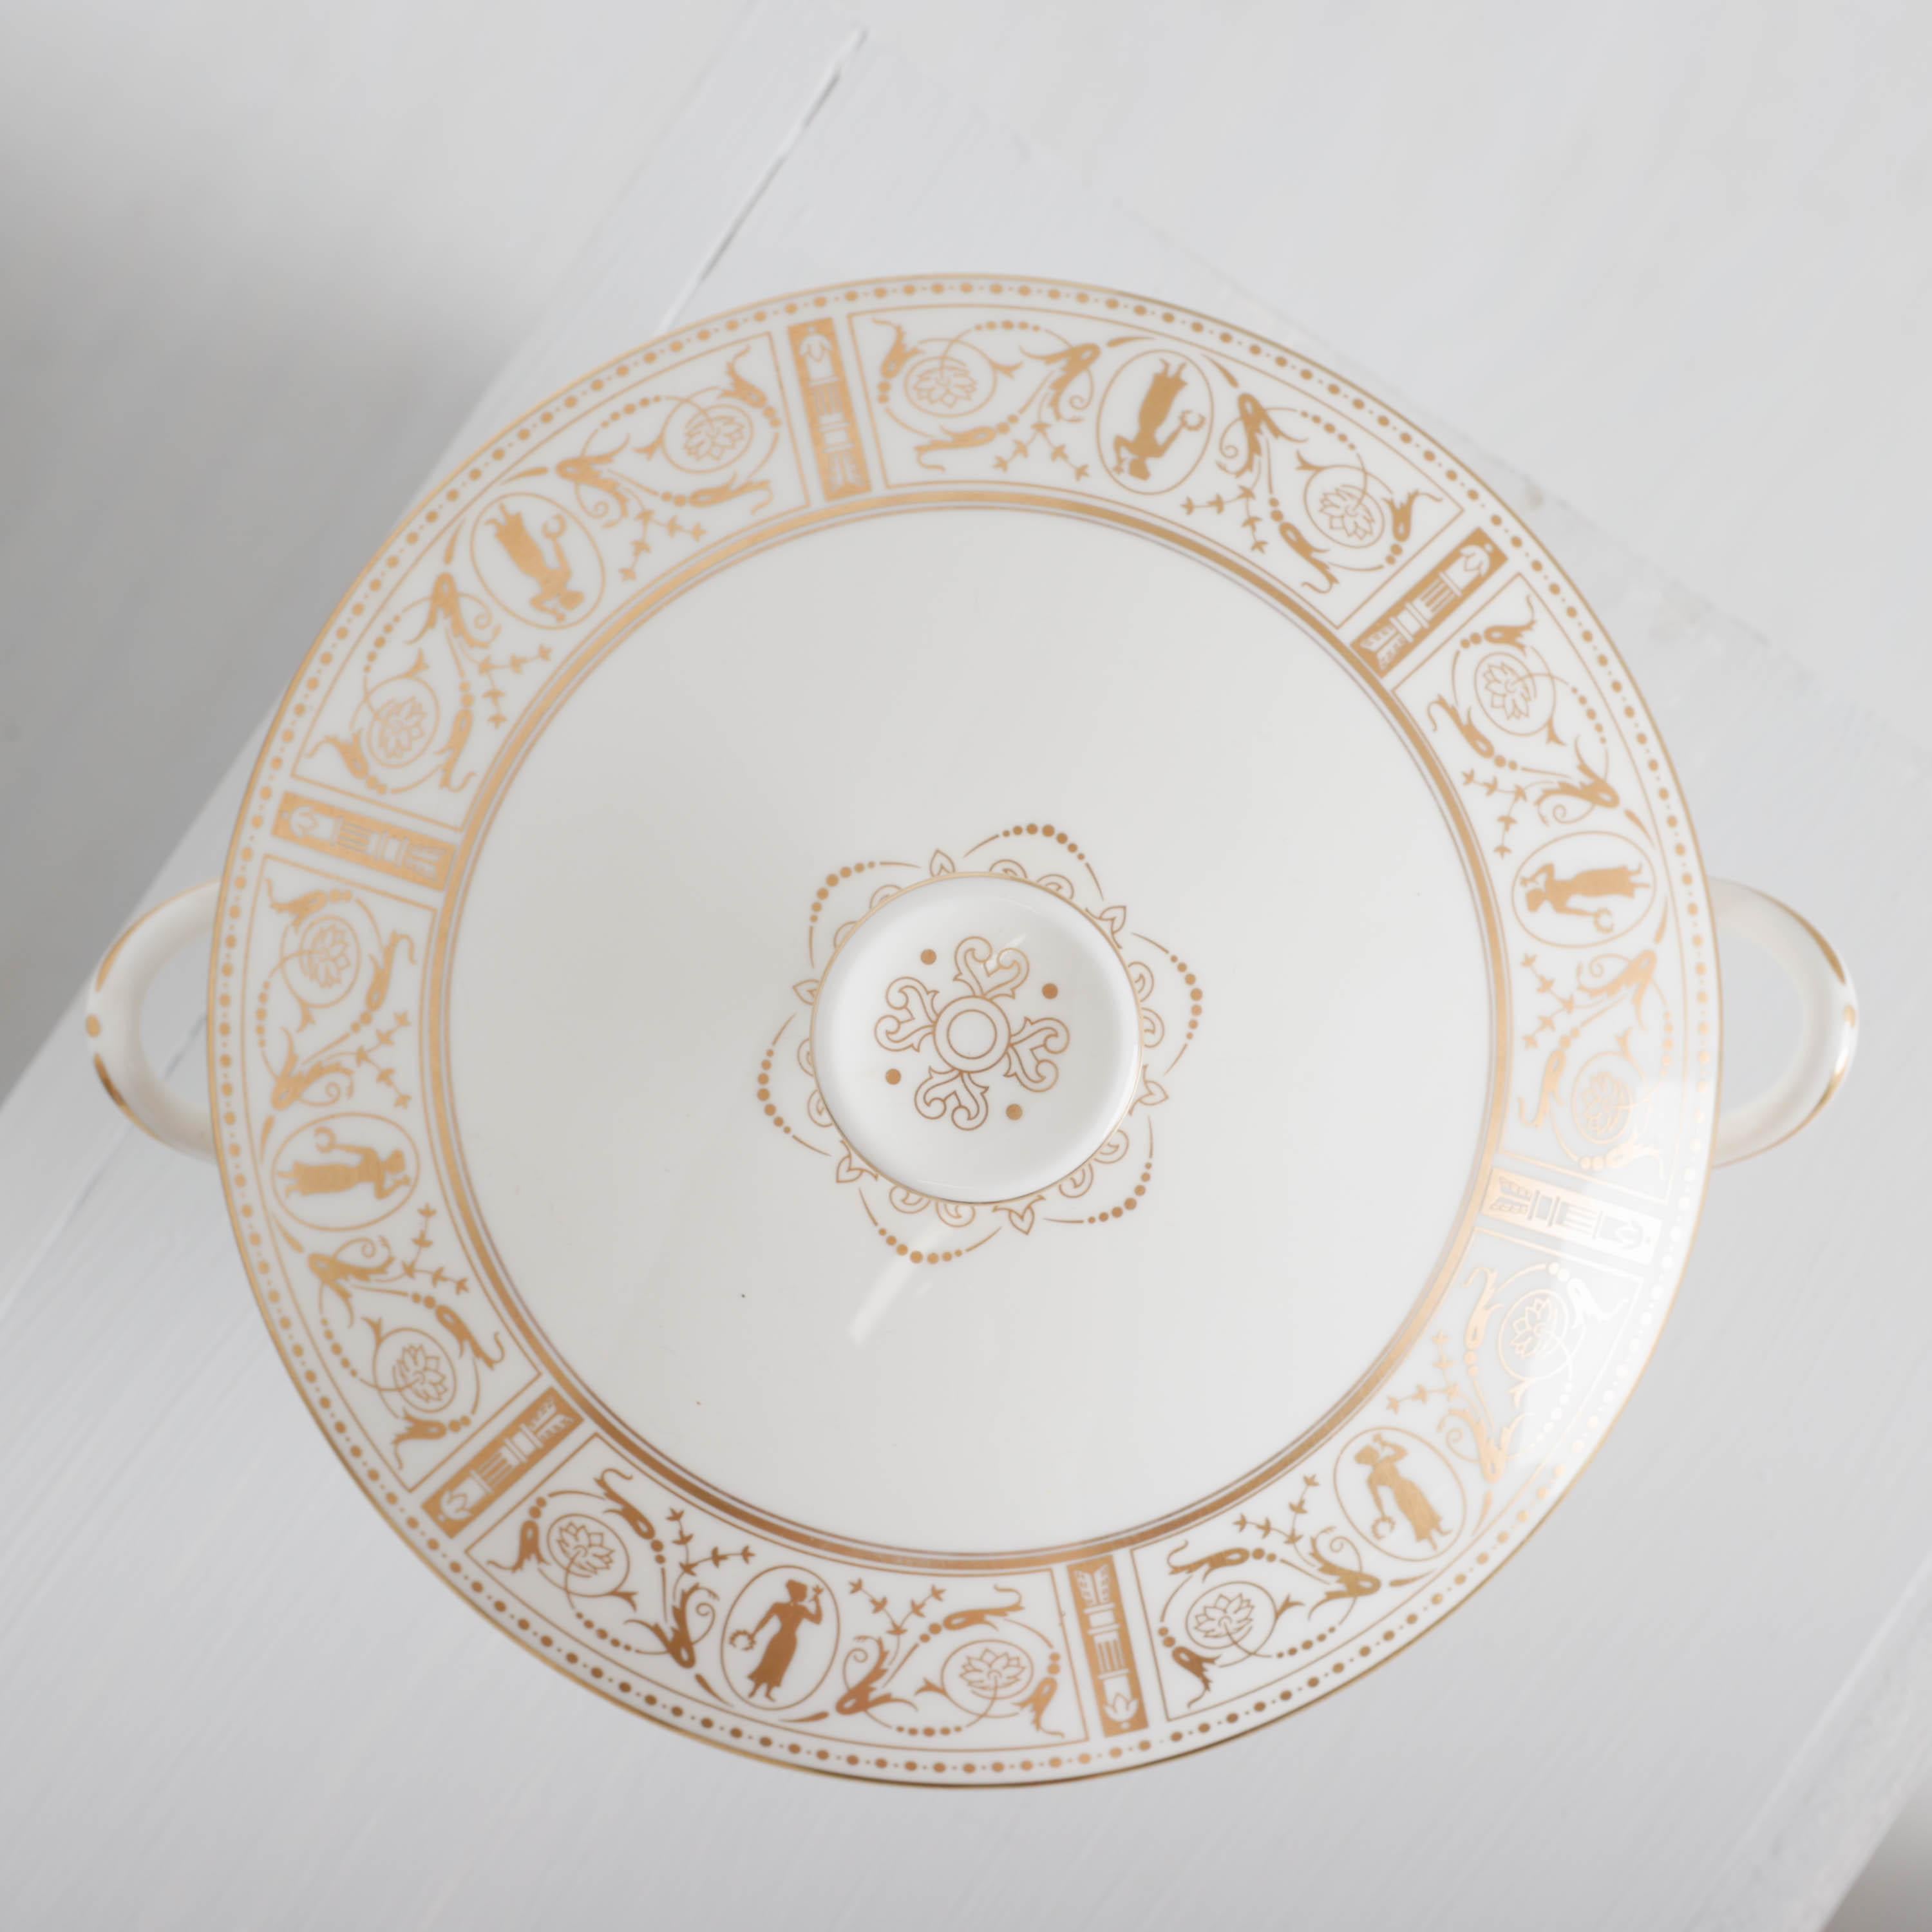 China Service for 12 Wedgewood Gold Grecian Circa 1964 For Sale 4